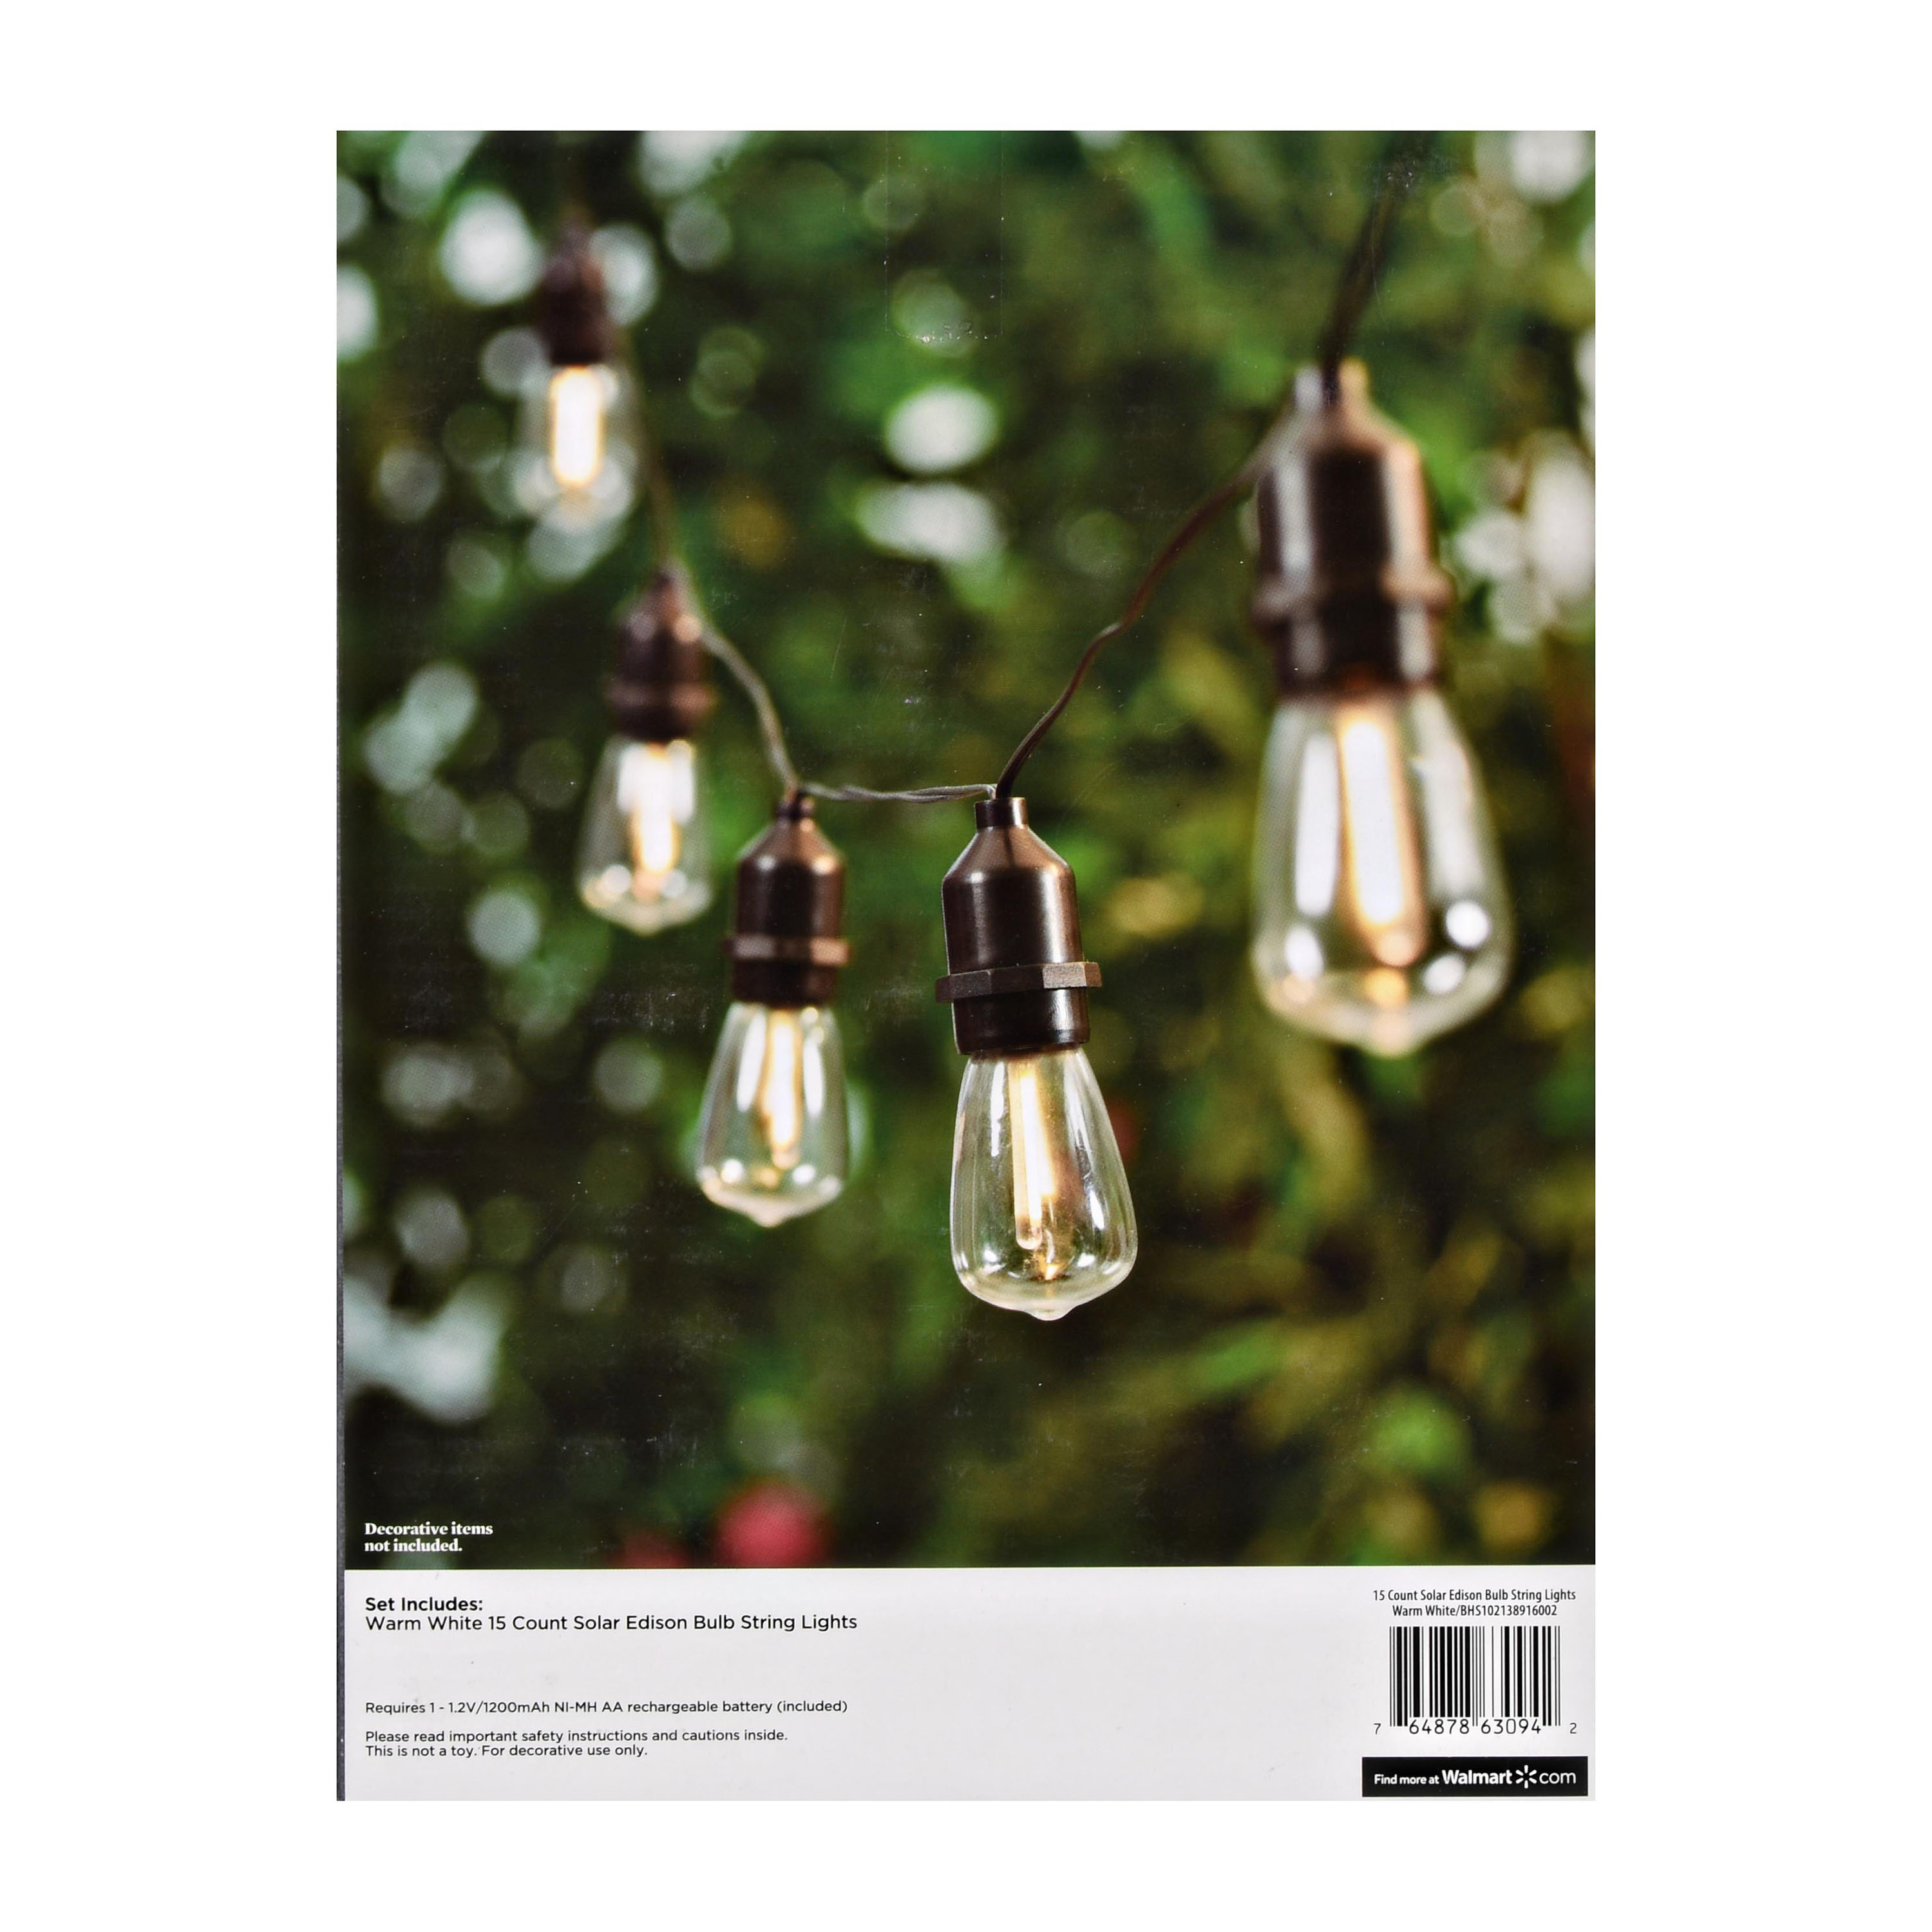 Better Homes & Gardens 15-Count Solar Powered Edison Outdoor String Lights, with Warm White LED Bulbs - image 4 of 7